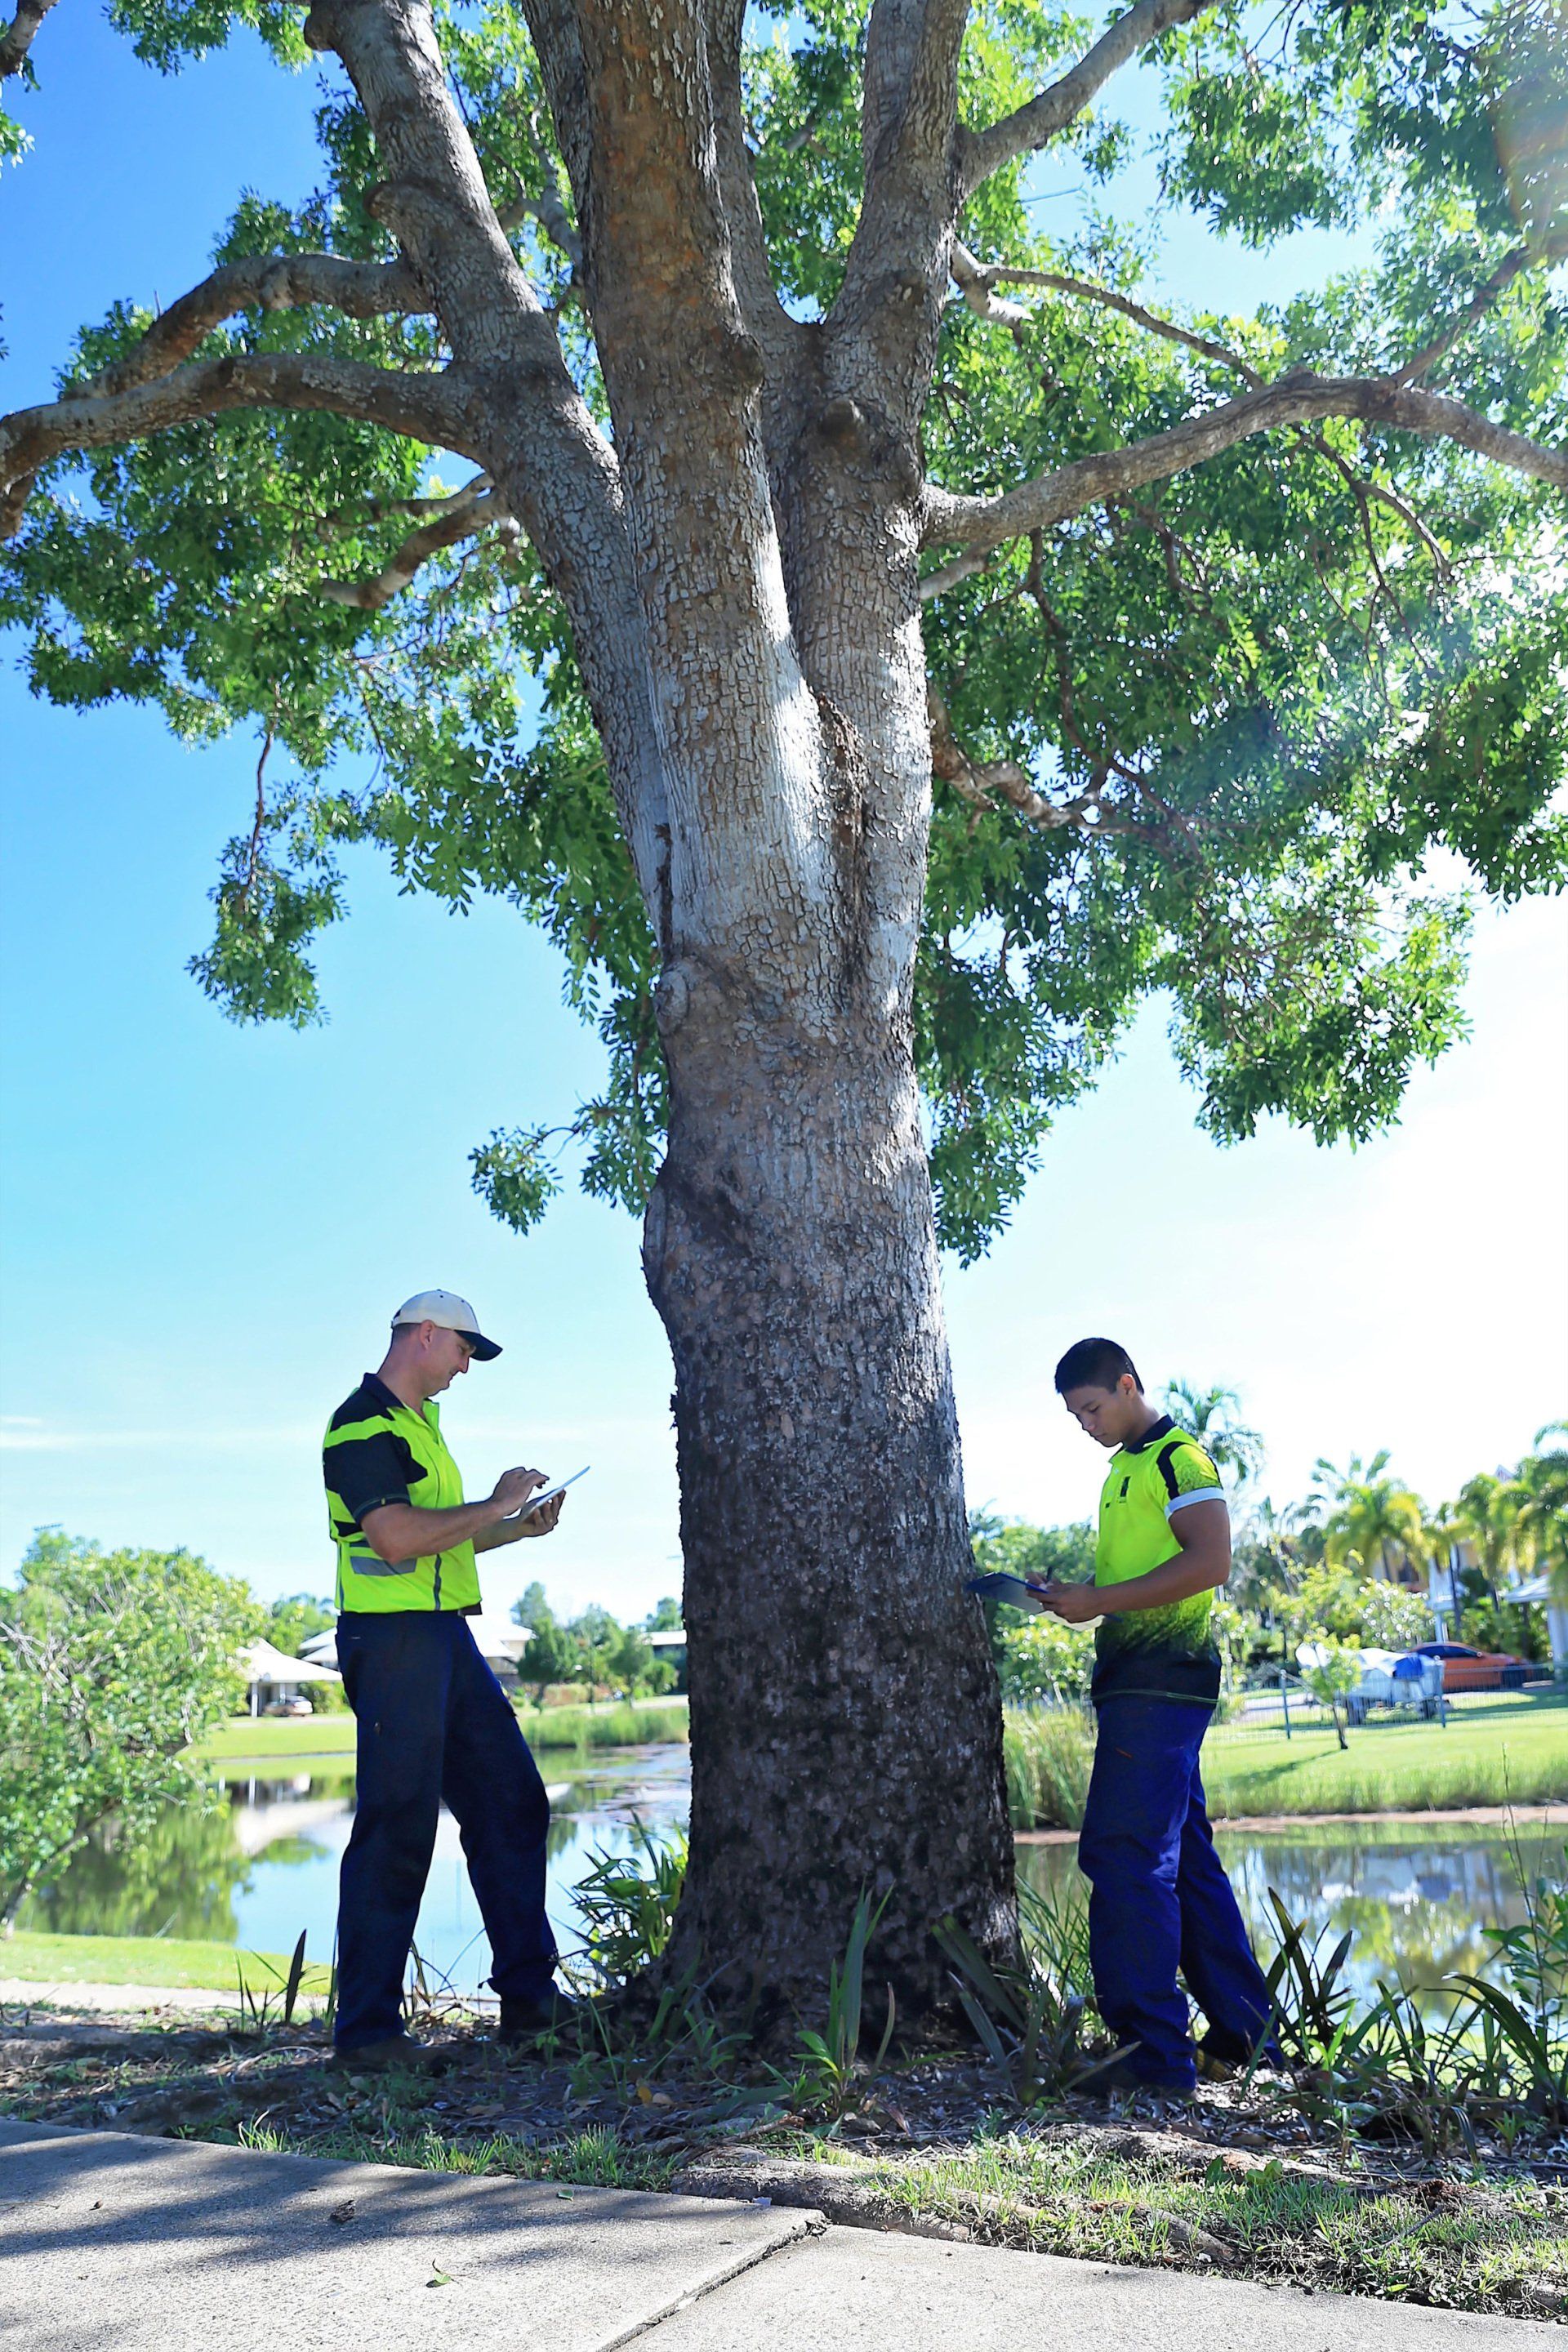 Arborist — Arafura Tree Services and Consulting in Pinelands, NT